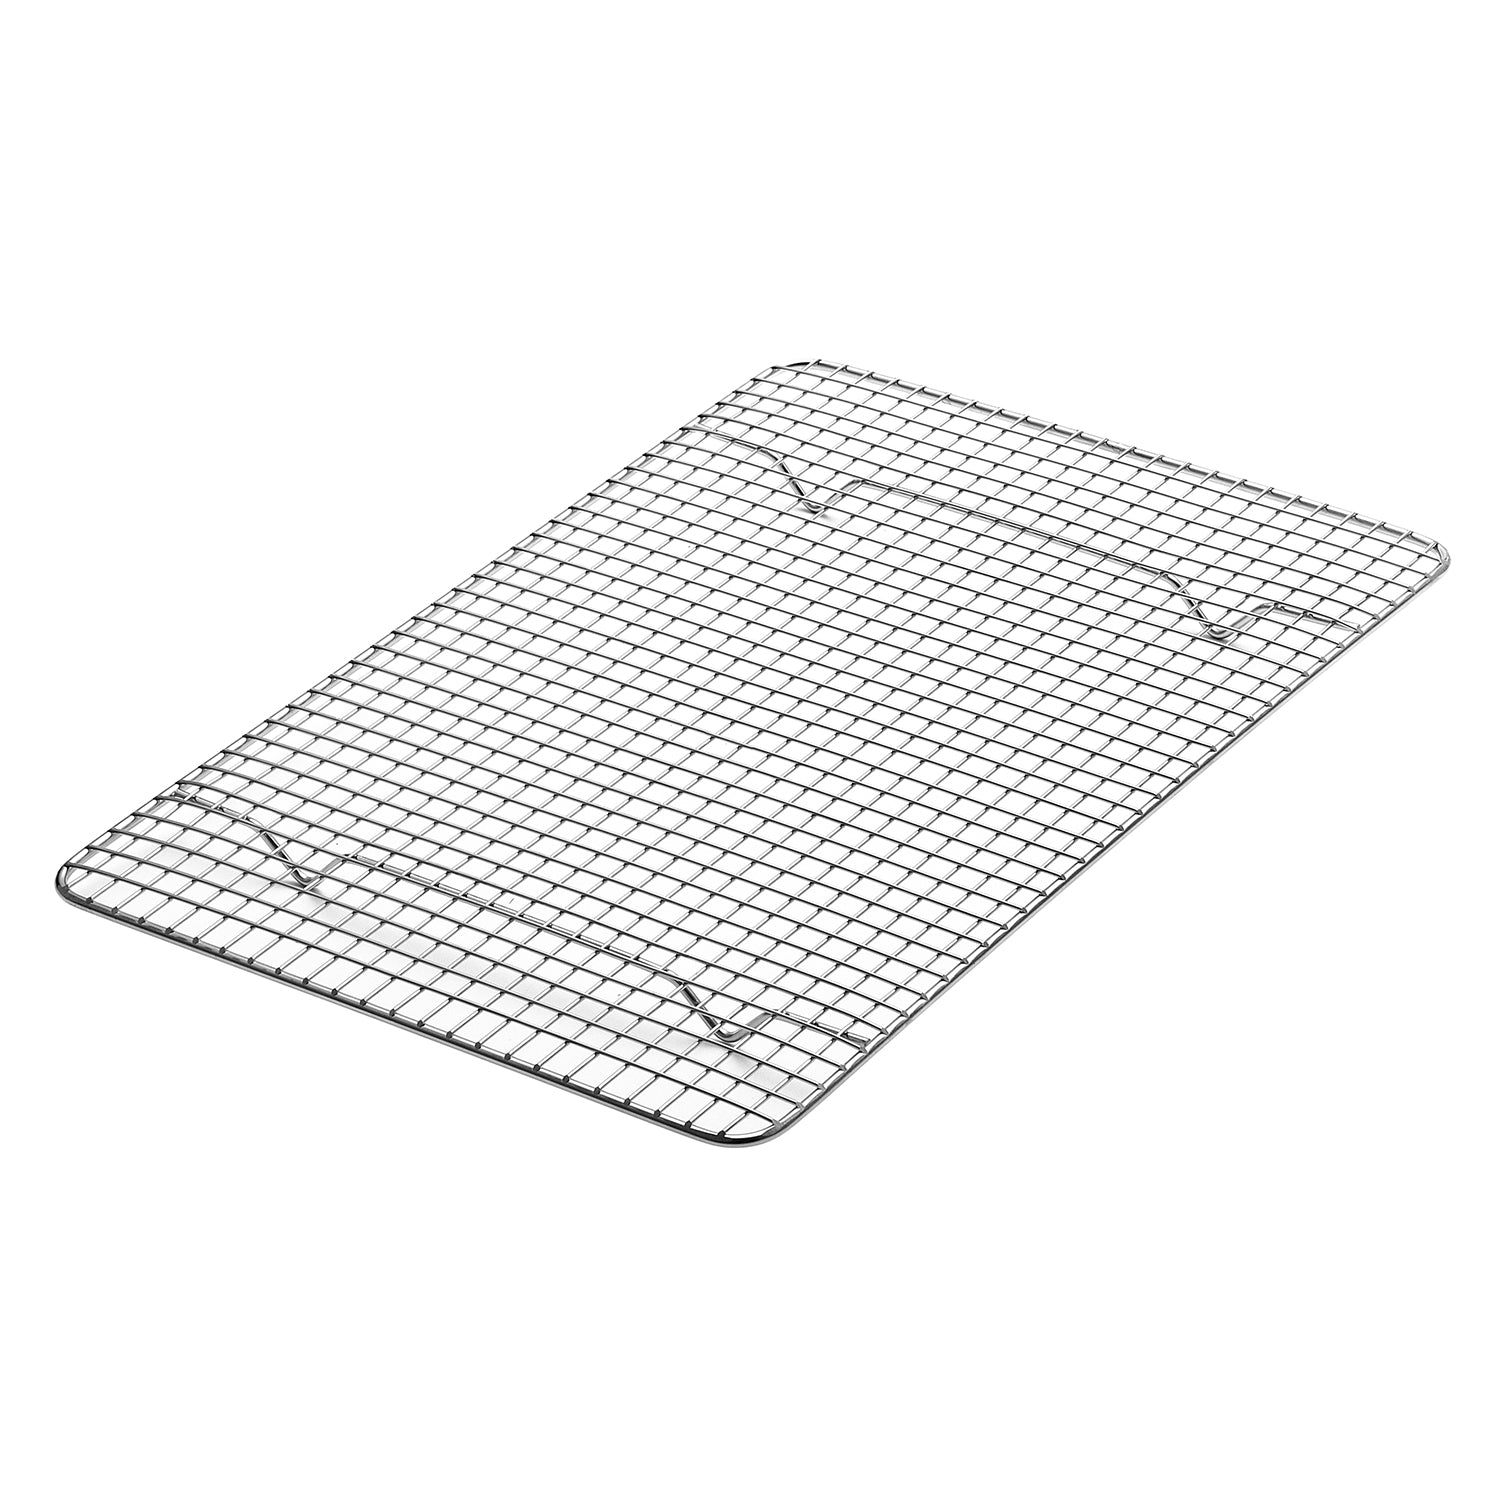 HILELIFE Cooling Rack, Oven Safe, 15 x 10 Inches Baking Rack for Oven Cooking, Stainless Steel Wire Rack for Baking